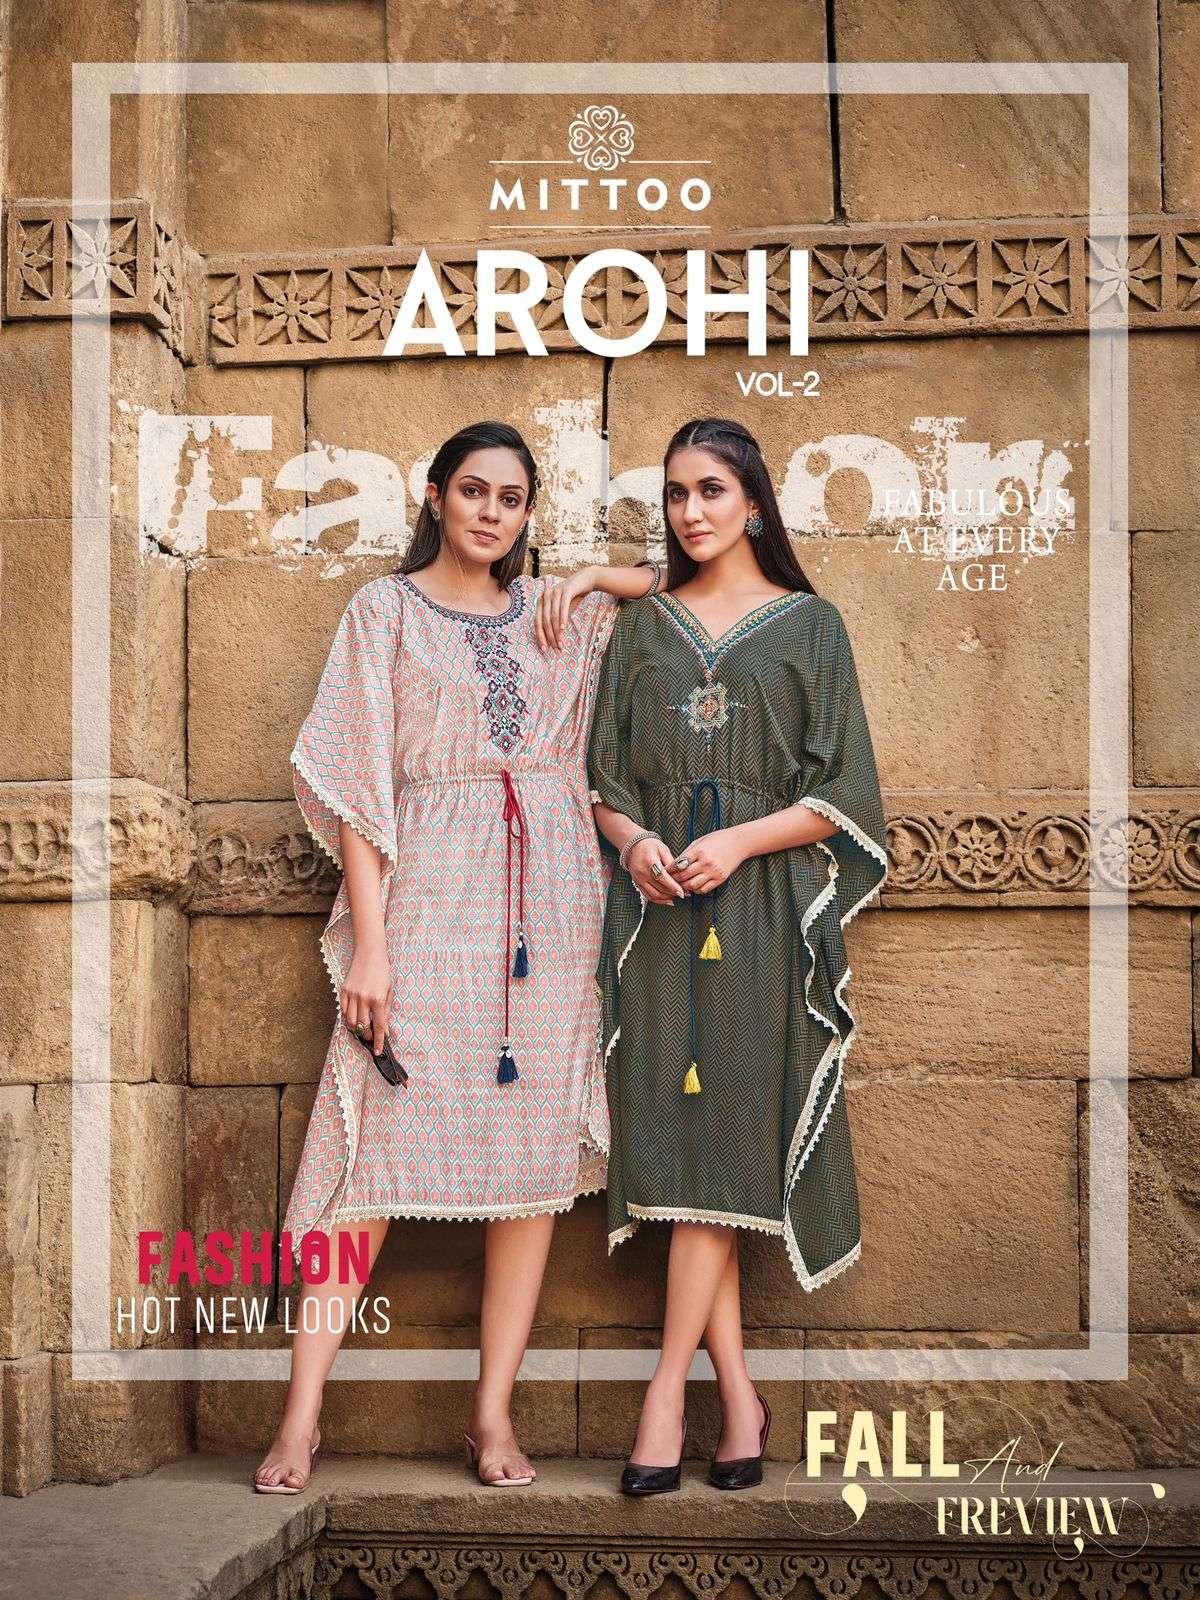 AROHI VOL 2 BY MITTOO BRAND RAYON CALSSY PRINT WITH NECK EMBROIDERY WORK WITH COTTON LACE KAFTAN KUR...